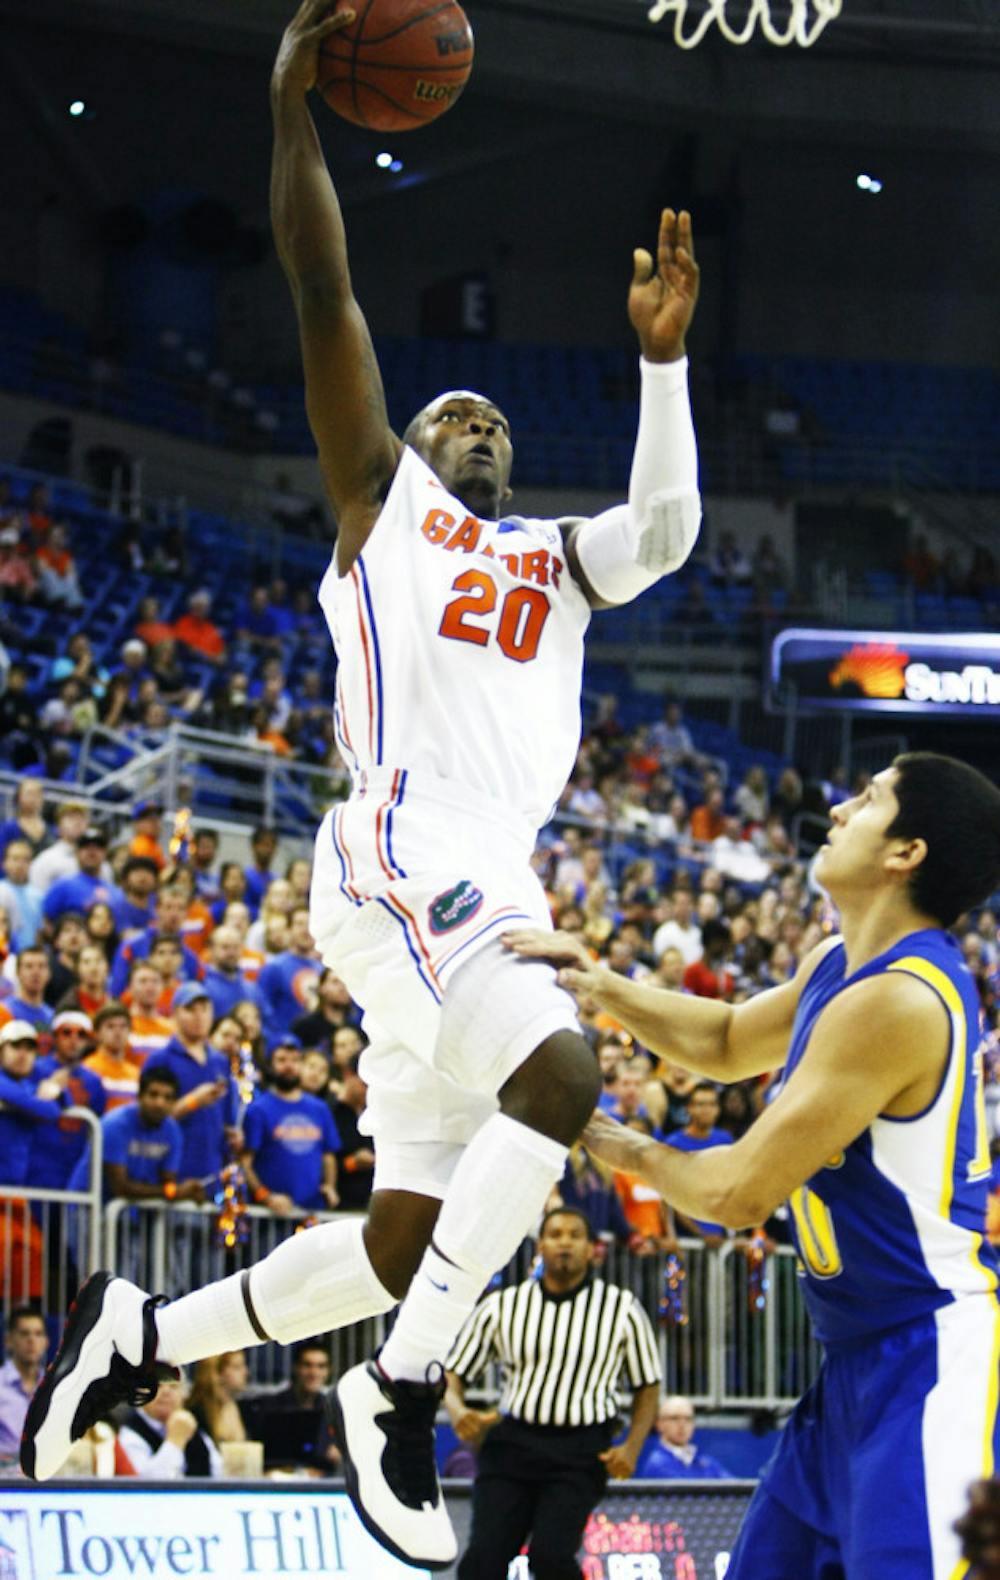 <p><span>Freshman guard Michael Frazier II attempts a layup during UF’s 101-71 win against Nebraska-Kearney on Nov. 1 in the O’Connell Center.</span><span> Frazier scored a team-high 17 points against Marquette on Thursday night.</span></p>
<div><span><br /></span></div>